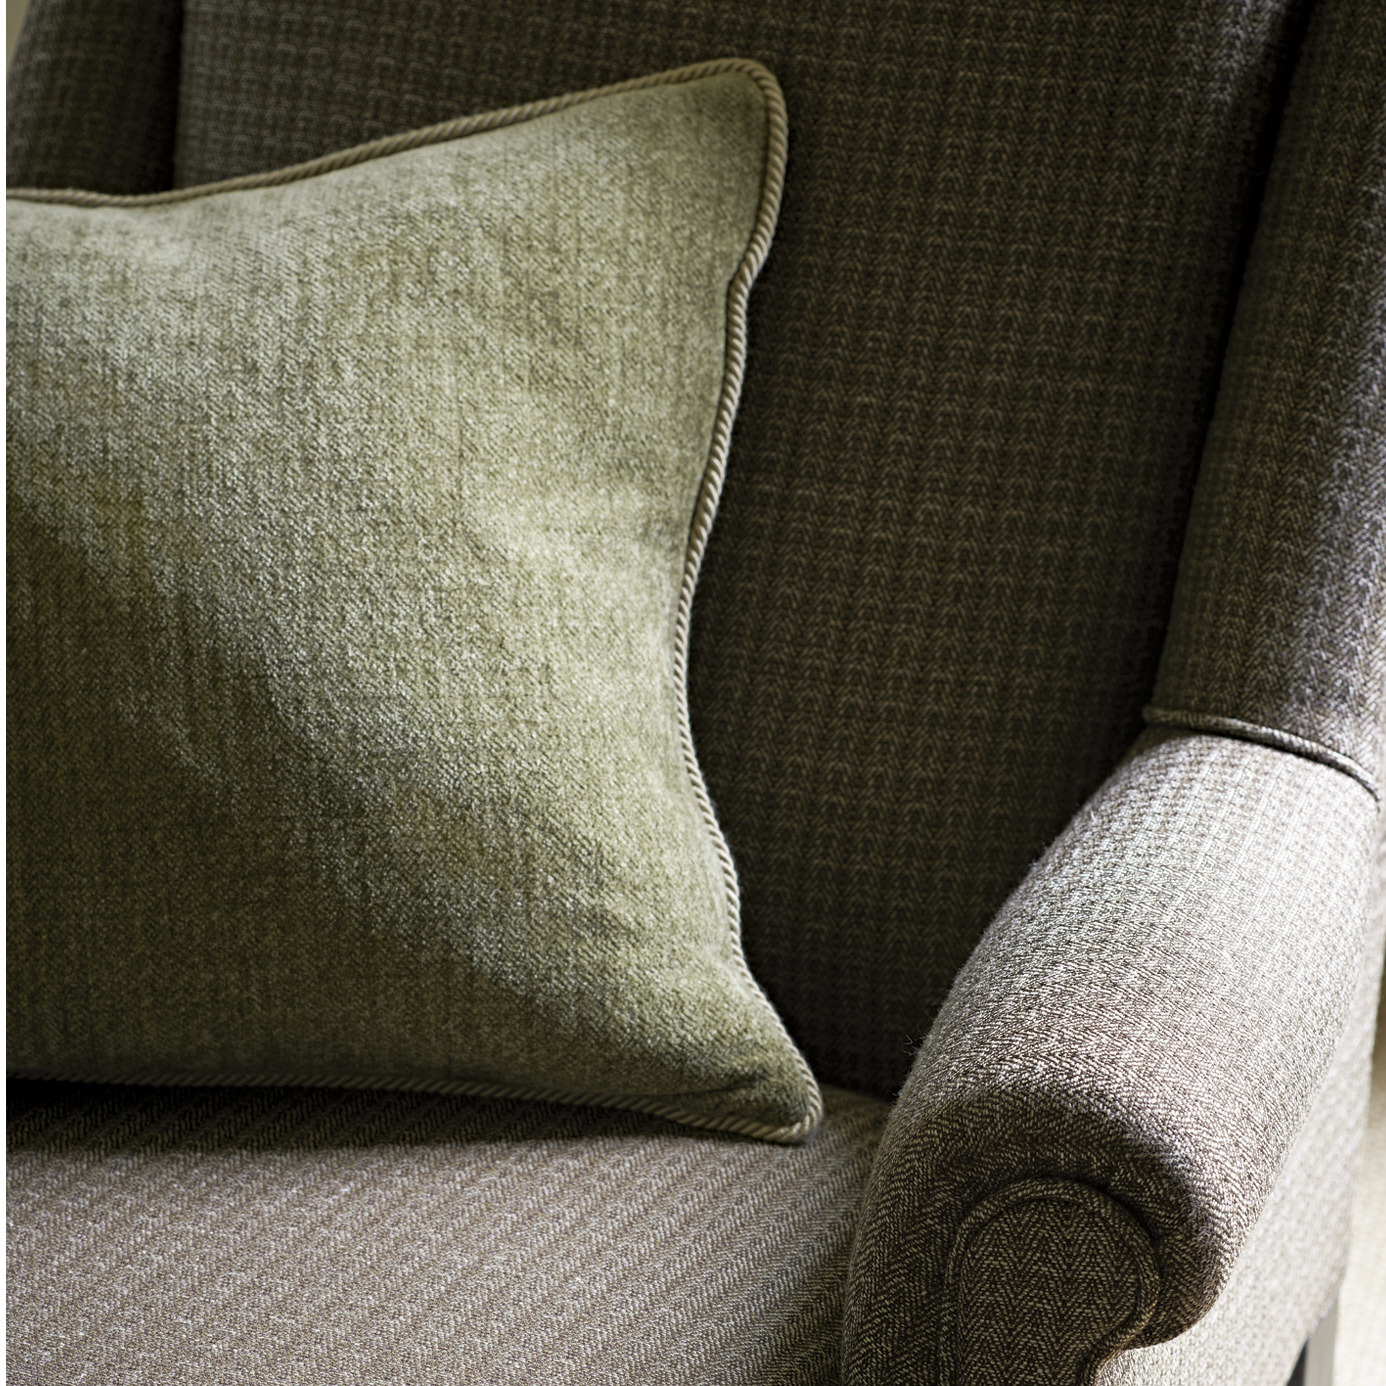 Cottesmore Hedgerow Fabric by ZOF